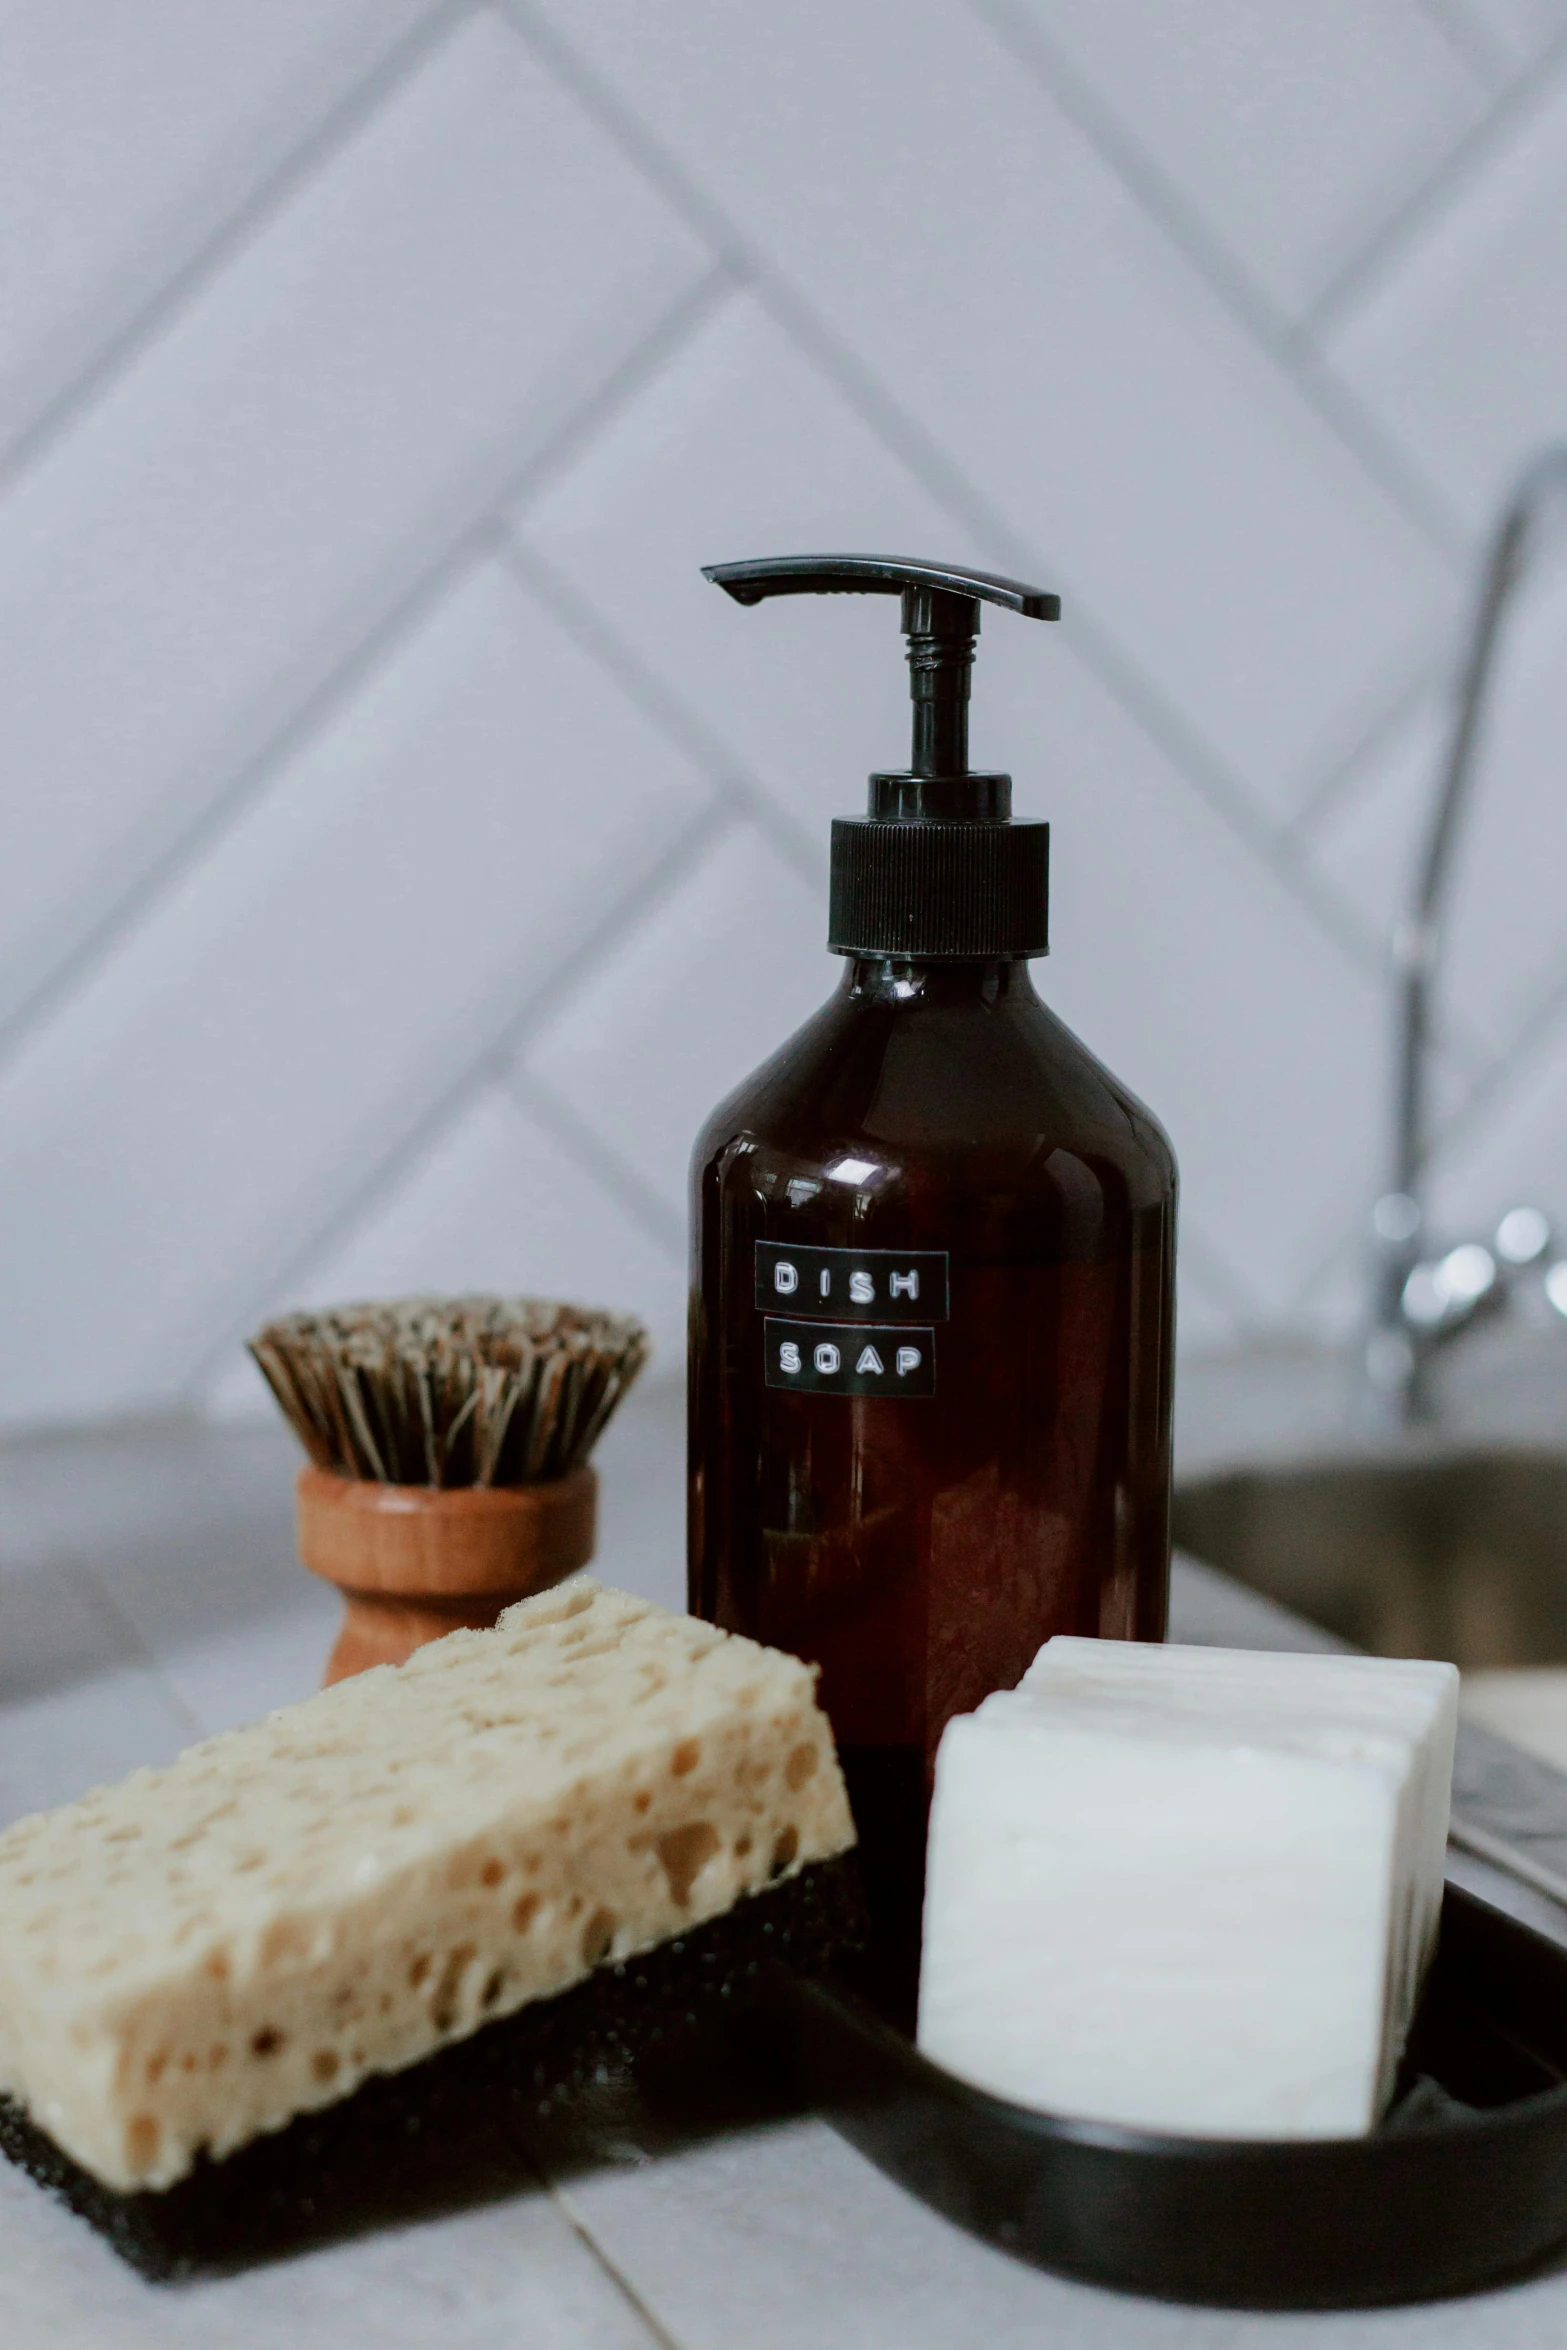 a bottle of soap sitting on top of a counter next to a soap dish, unsplash, brown, gloss finish, ingredients on the table, 3 0 0 mm